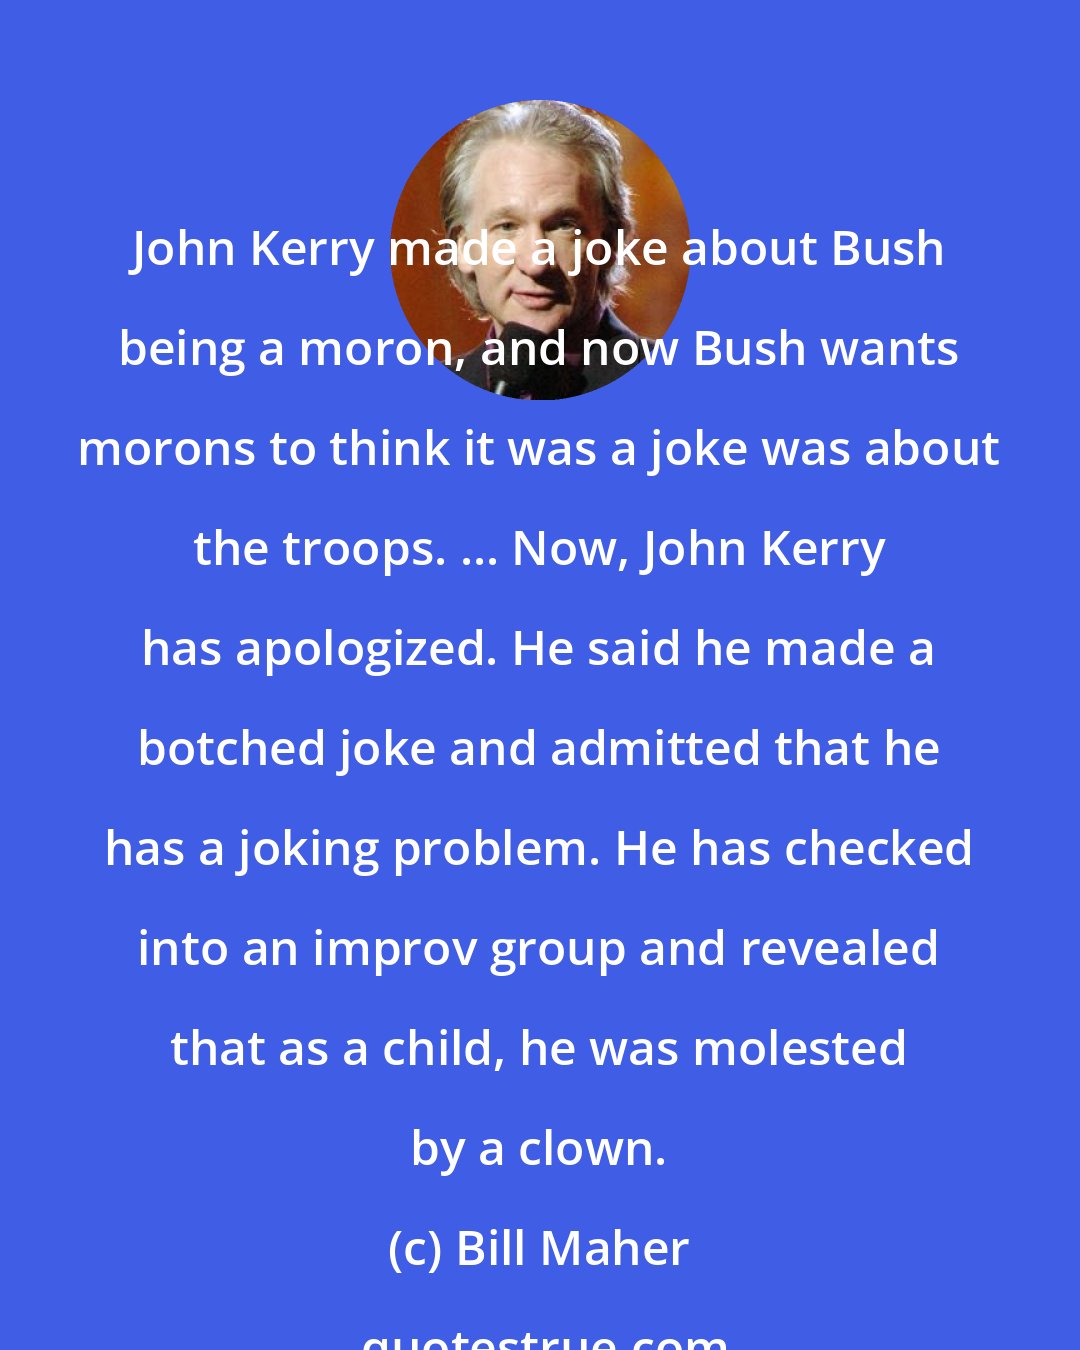 Bill Maher: John Kerry made a joke about Bush being a moron, and now Bush wants morons to think it was a joke was about the troops. ... Now, John Kerry has apologized. He said he made a botched joke and admitted that he has a joking problem. He has checked into an improv group and revealed that as a child, he was molested by a clown.